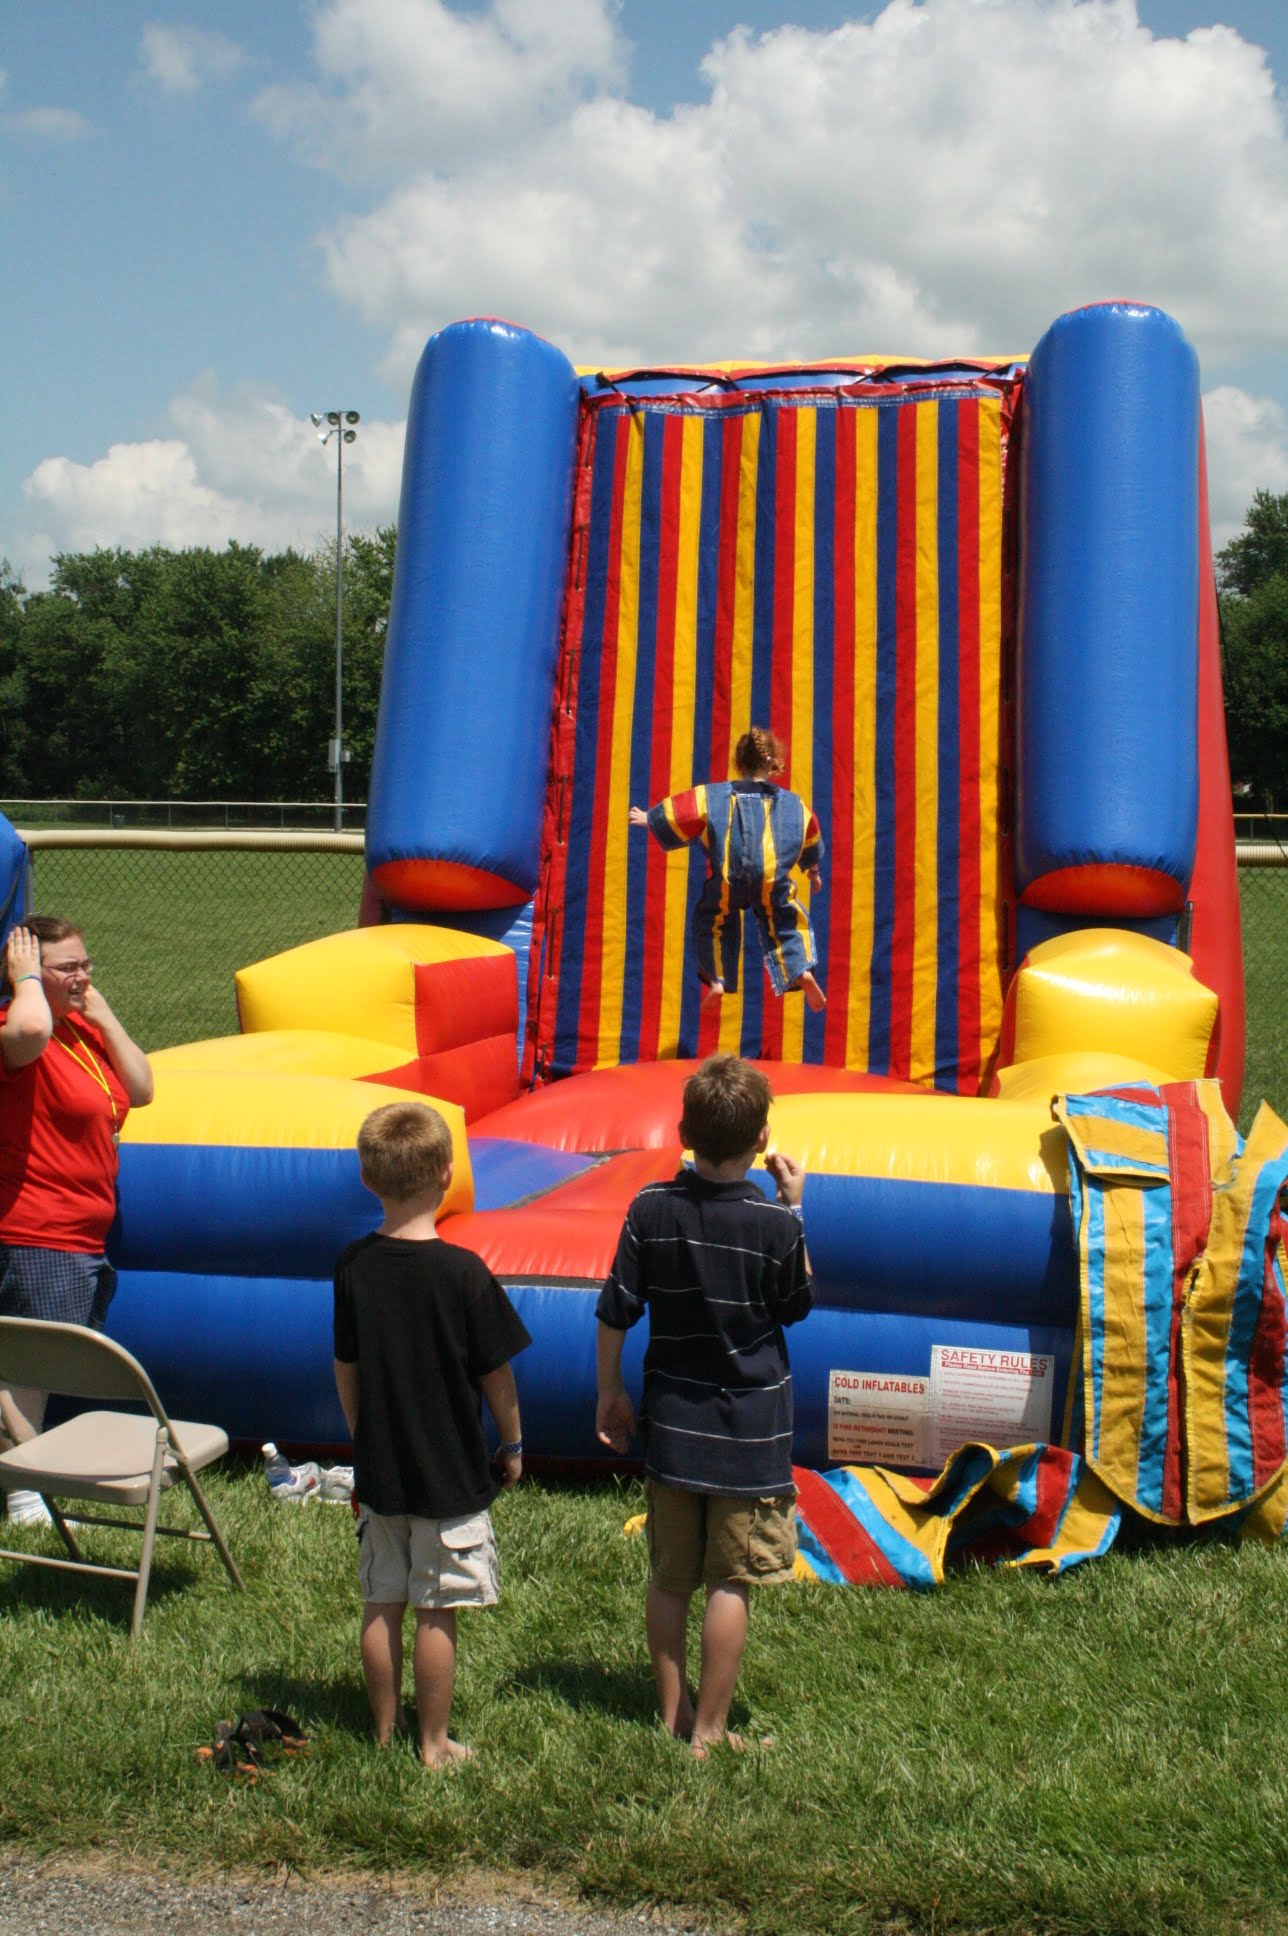 Velcro Wall - Events by Fun Services